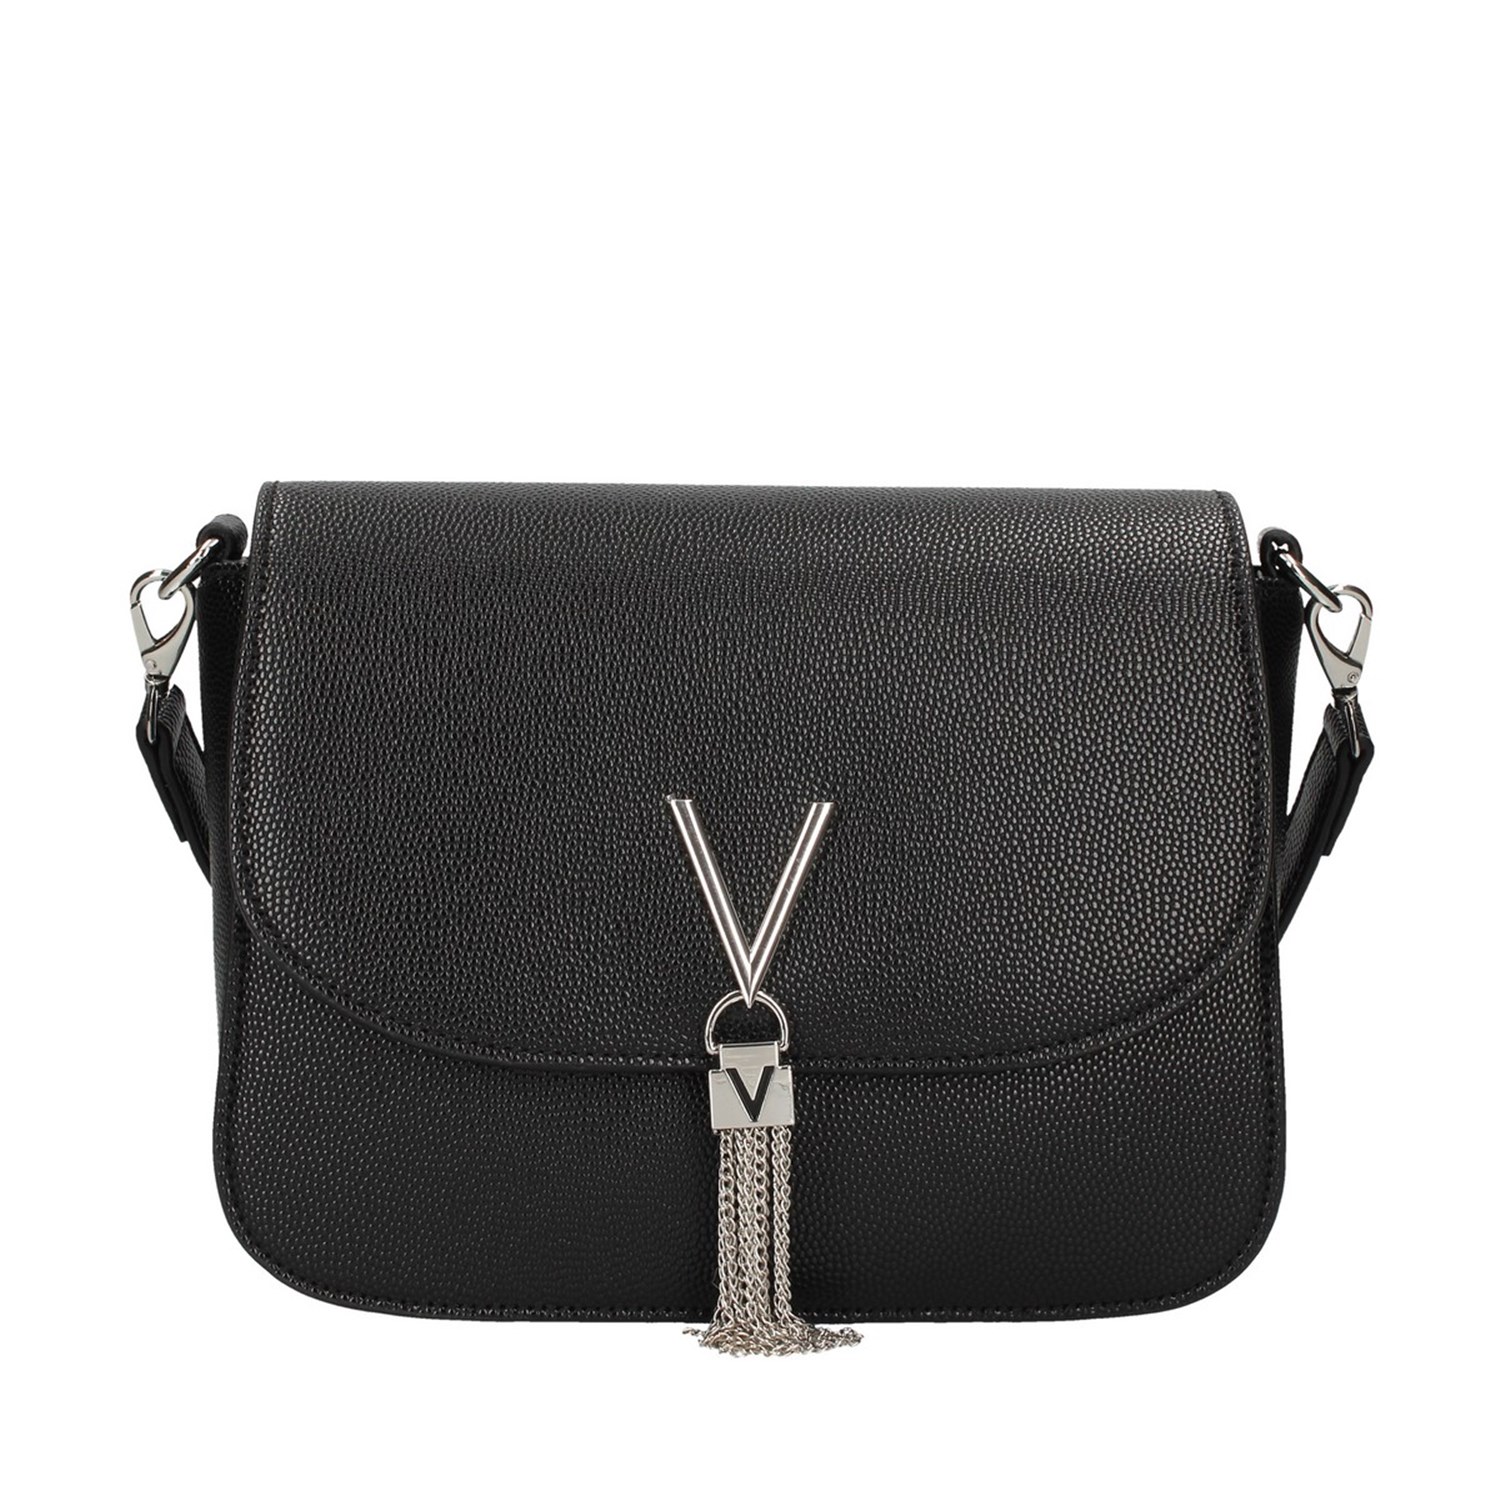 Valentino Bags Bags Accessories Shoulder Strap BLACK VBS1R404G